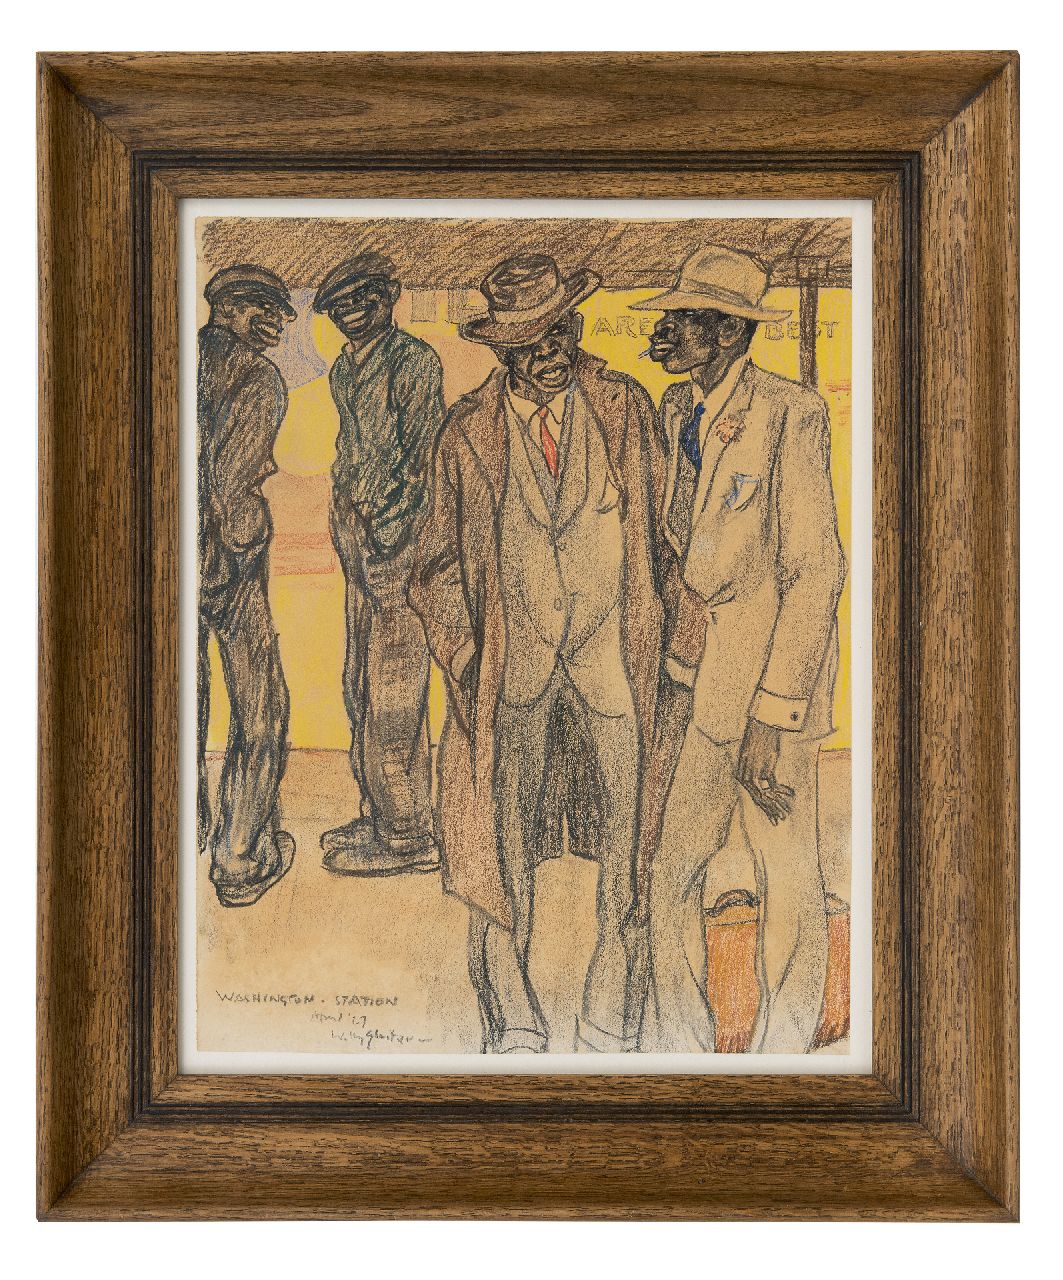 Sluiter J.W.  | Jan Willem 'Willy' Sluiter | Watercolours and drawings offered for sale | On the platform, Washington Station, black and coloured chalk on paper 46.5 x 36.6 cm, signed l.l. and dated April '27